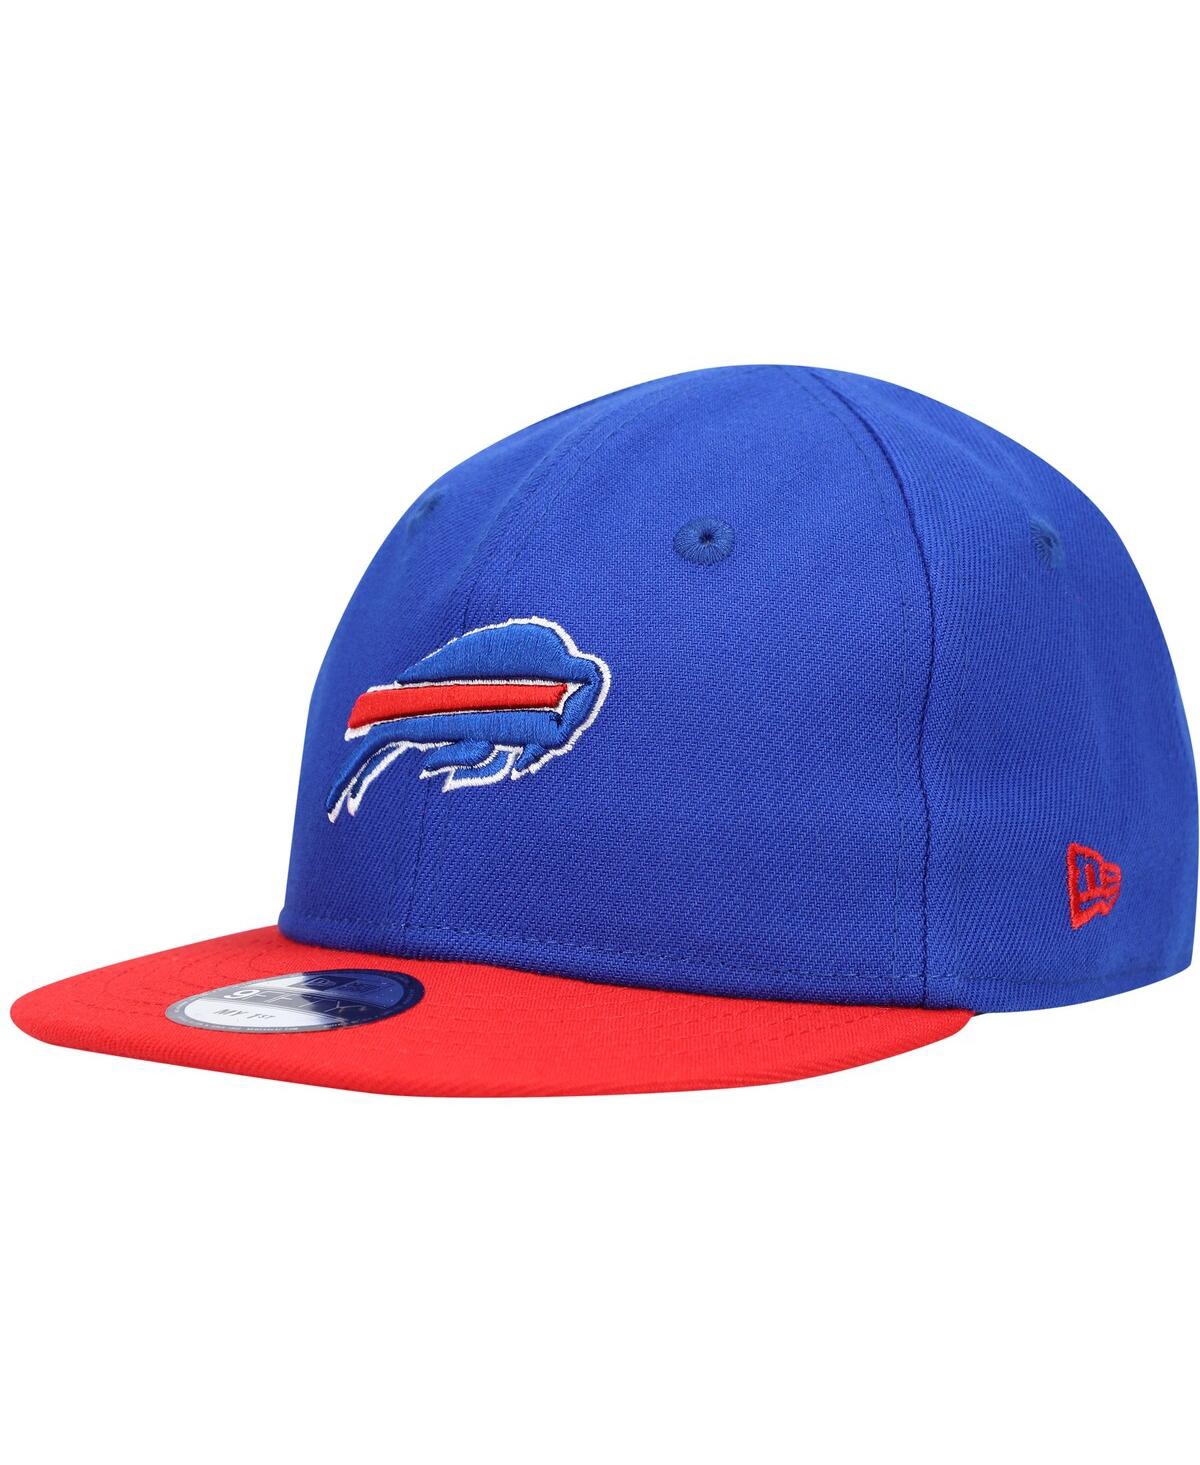 New Era Babies' Infant Unisex  Royal, Red Buffalo Bills Logo My 1st 9fifty Adjustable Hat In Royal,red